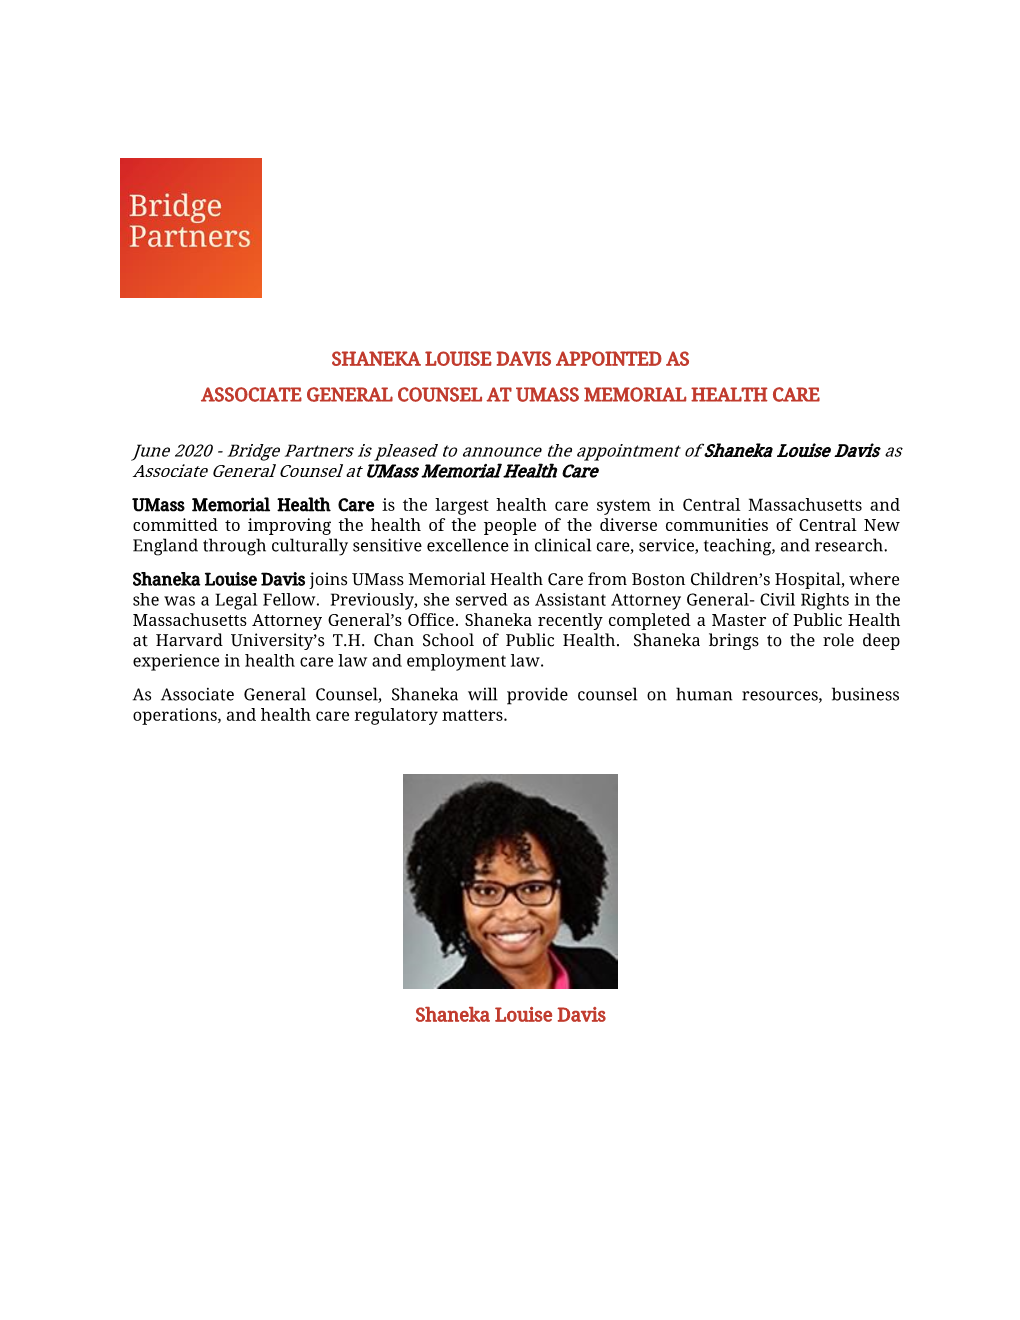 Shaneka Louise Davis Appointed As Associate General Counsel at Umass Memorial Health Care